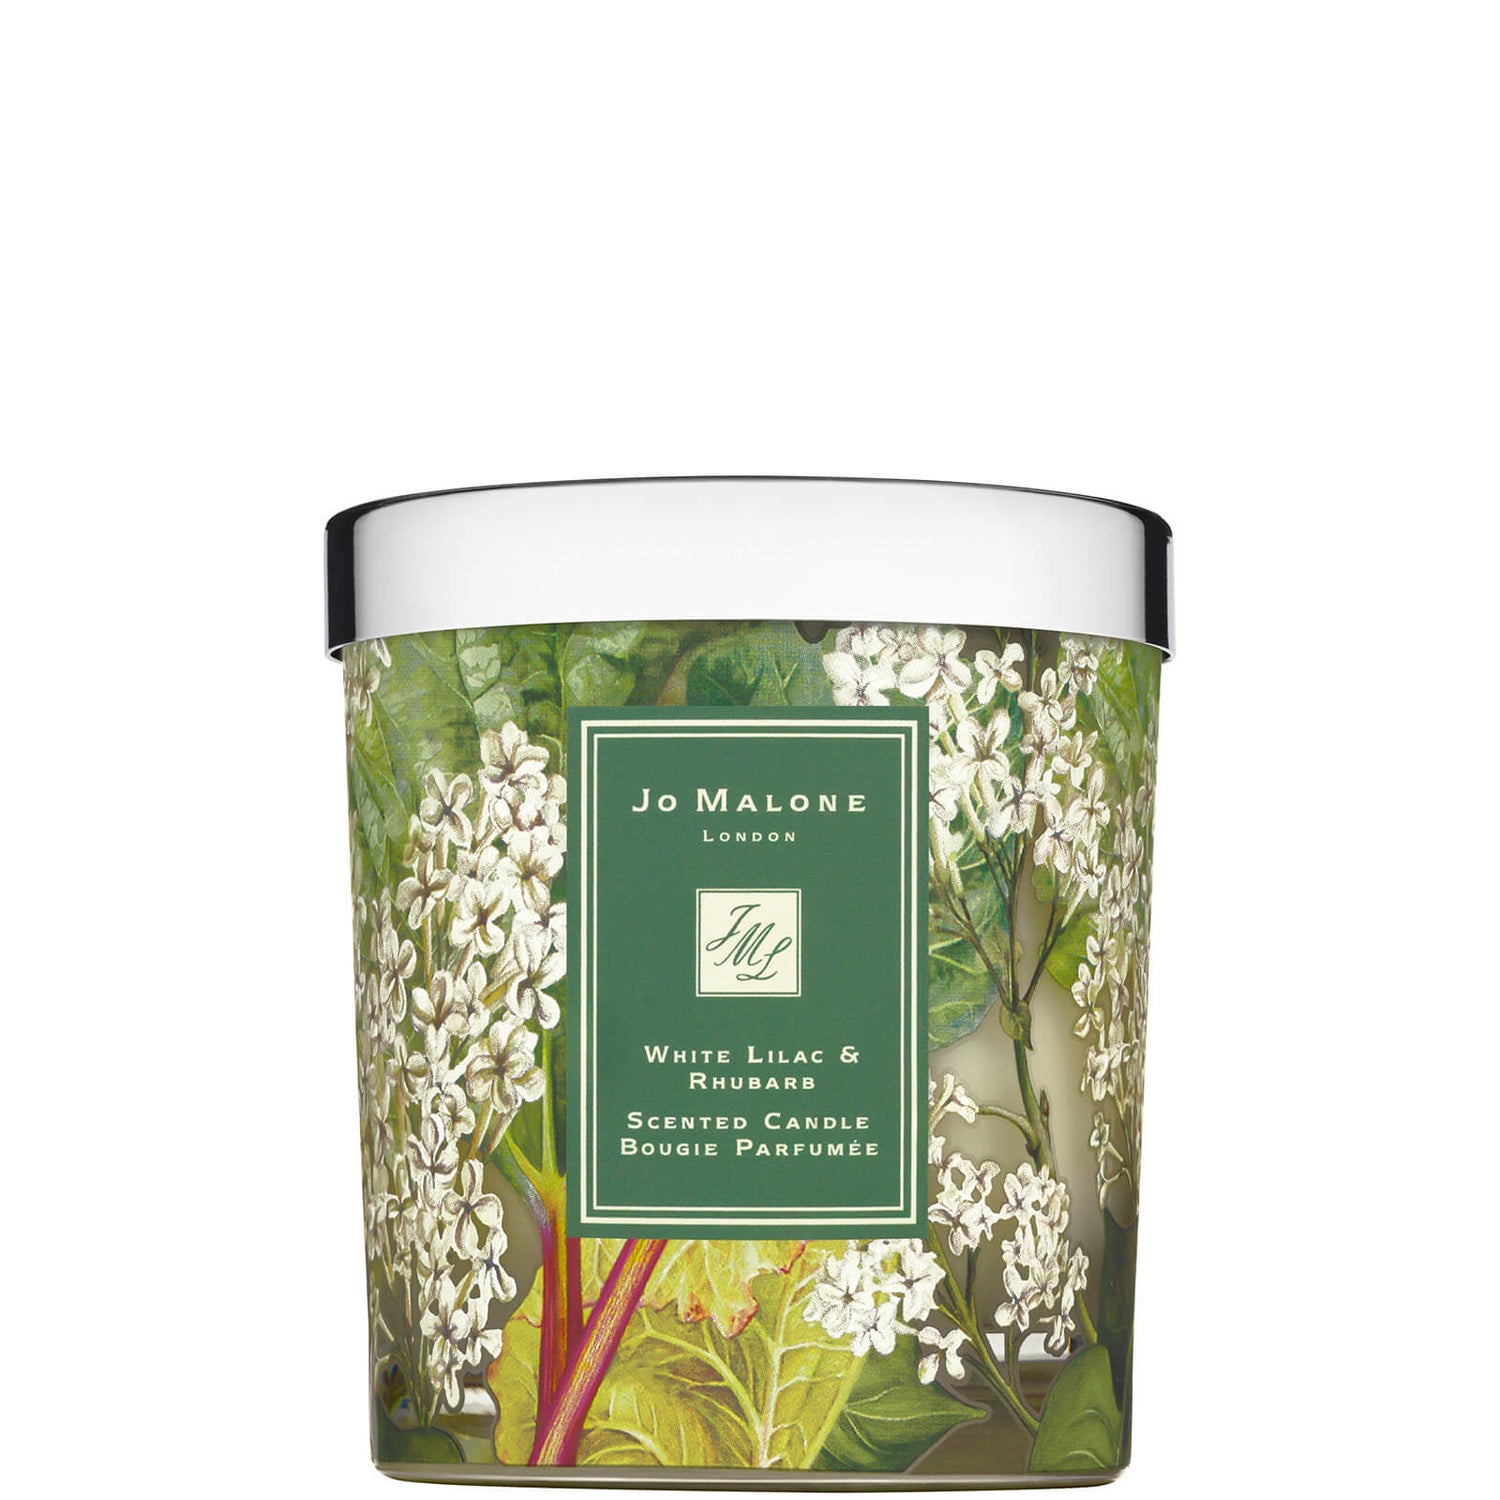 Jo Malone London White Lilac and Rhubarb Charity Candle 200g